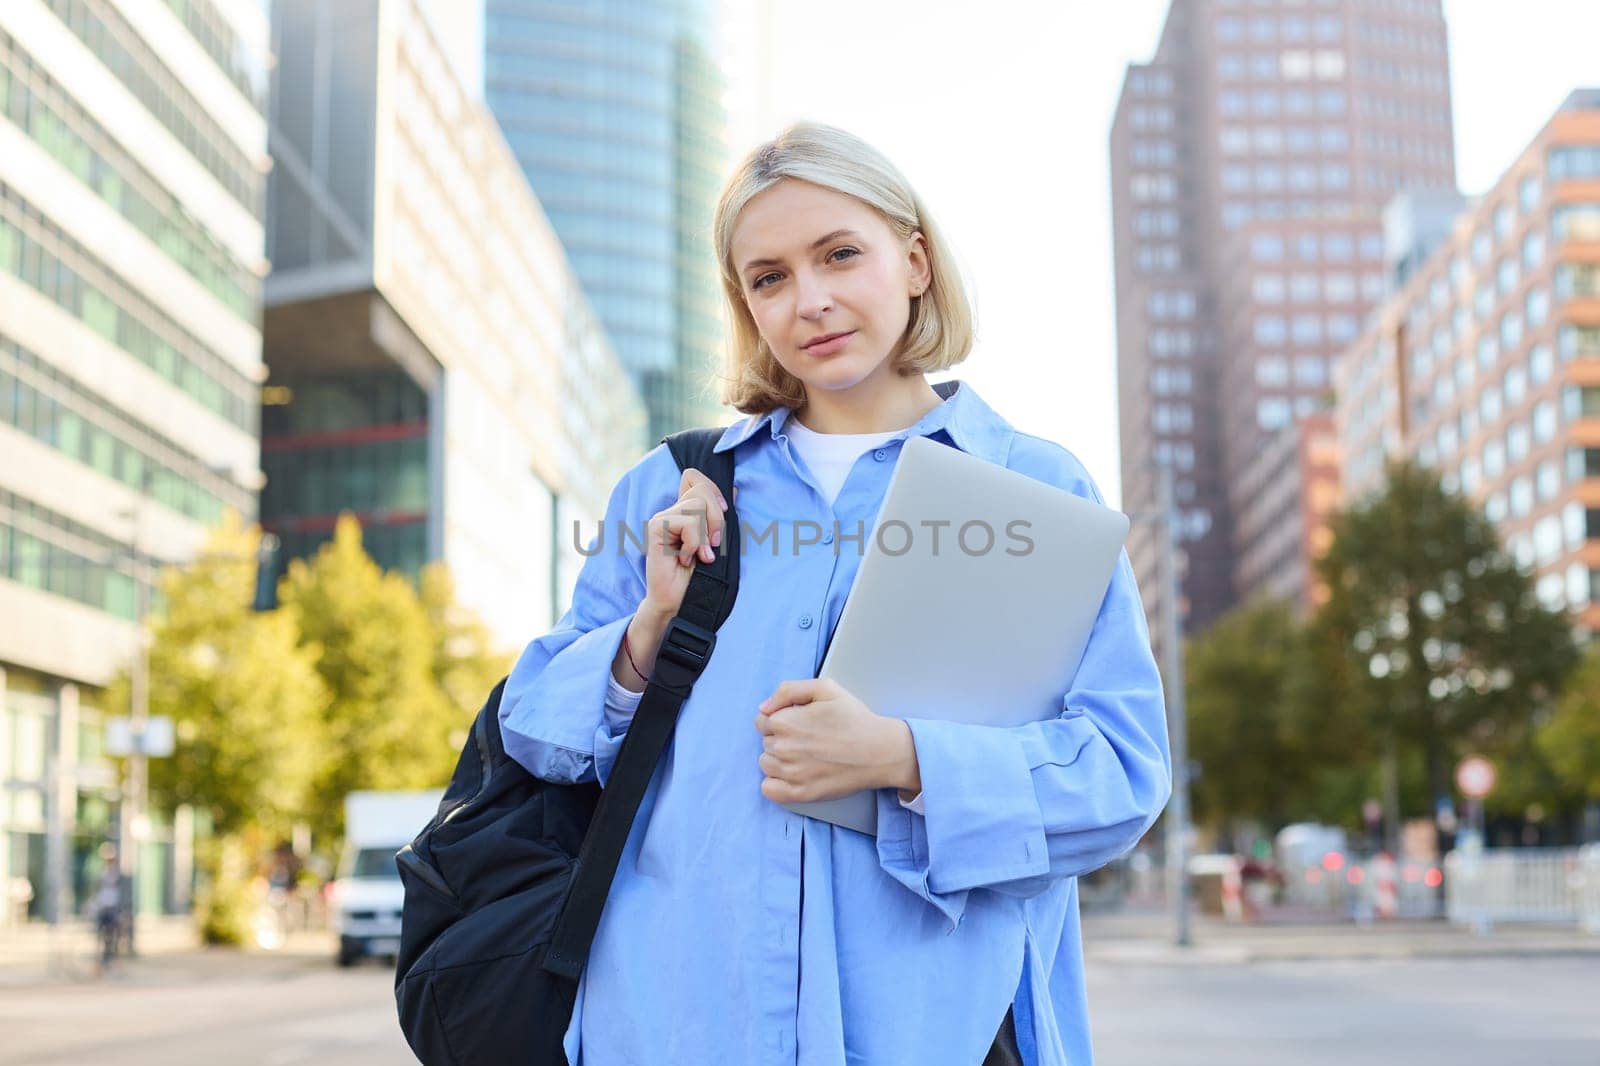 Portrait of young confident woman, college student with backpack and laptop, heading to lesson, standing outdoors on empty street with big buildings behind.